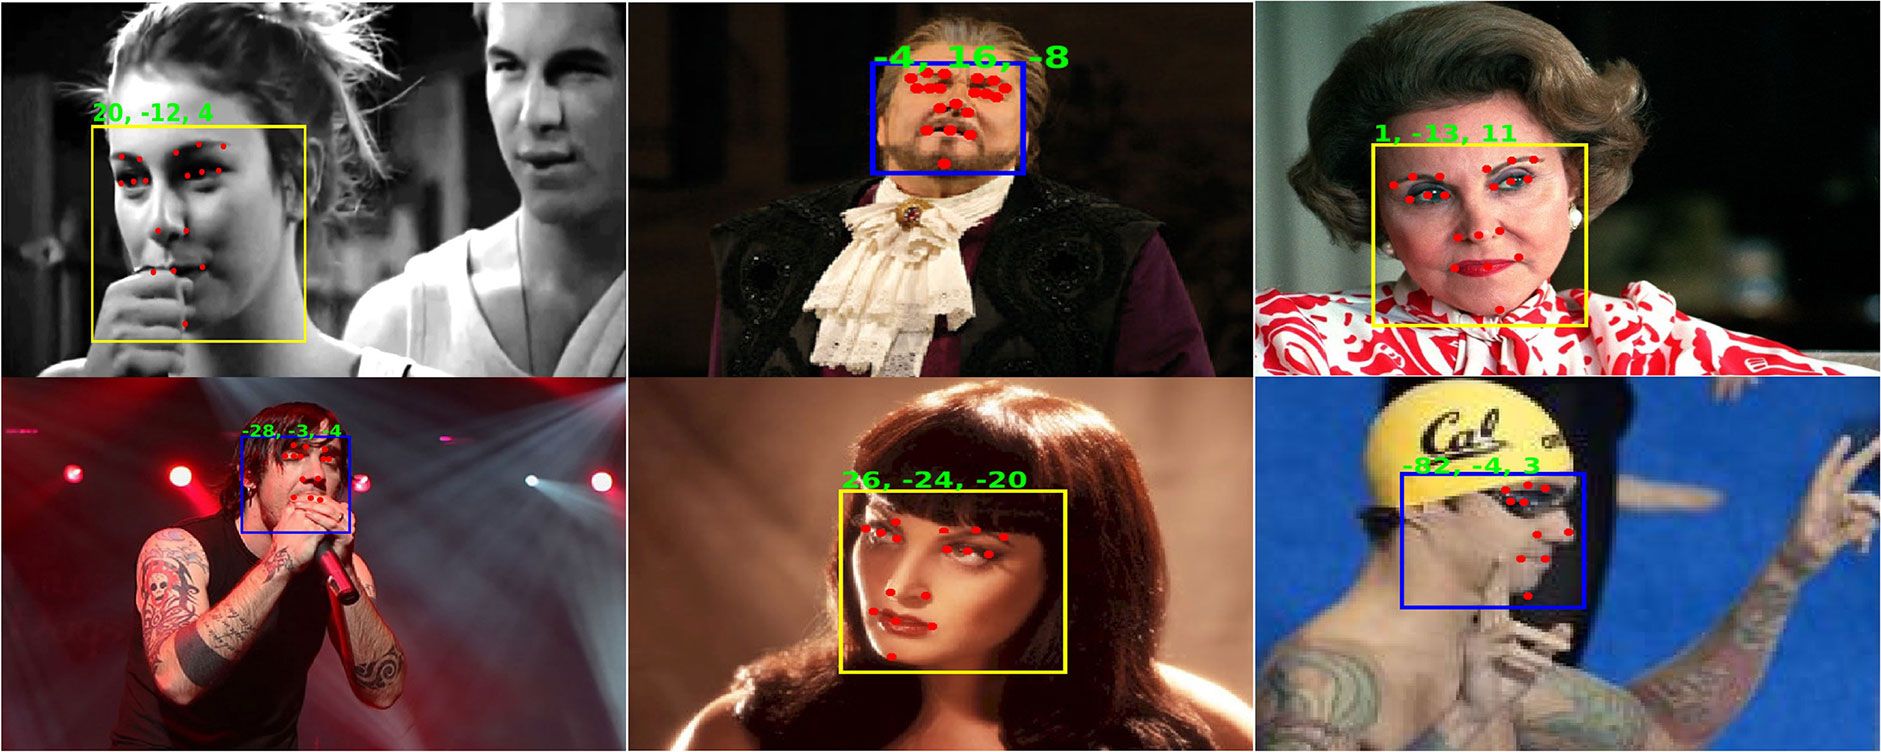 featured image - 5 Million Face Images for Facial Recognition Model Training